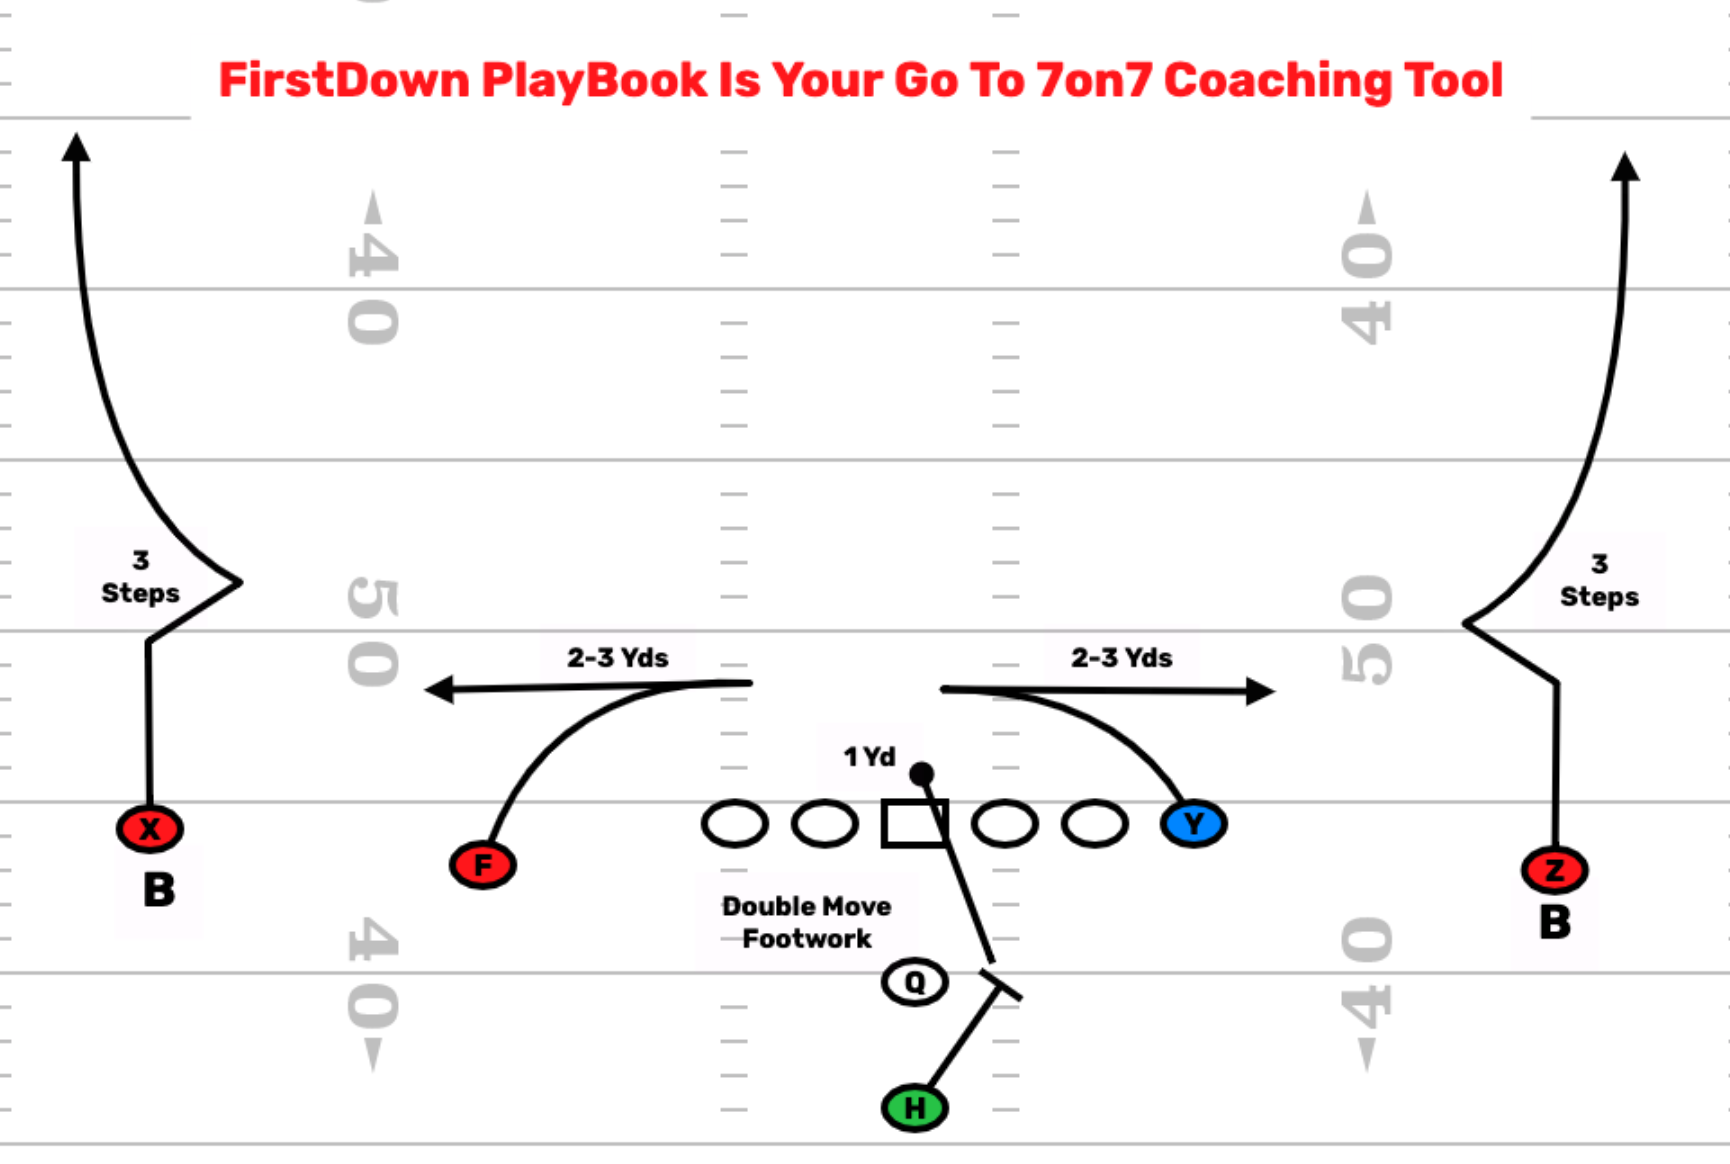 Your Go To 7on7 Coaching Tool